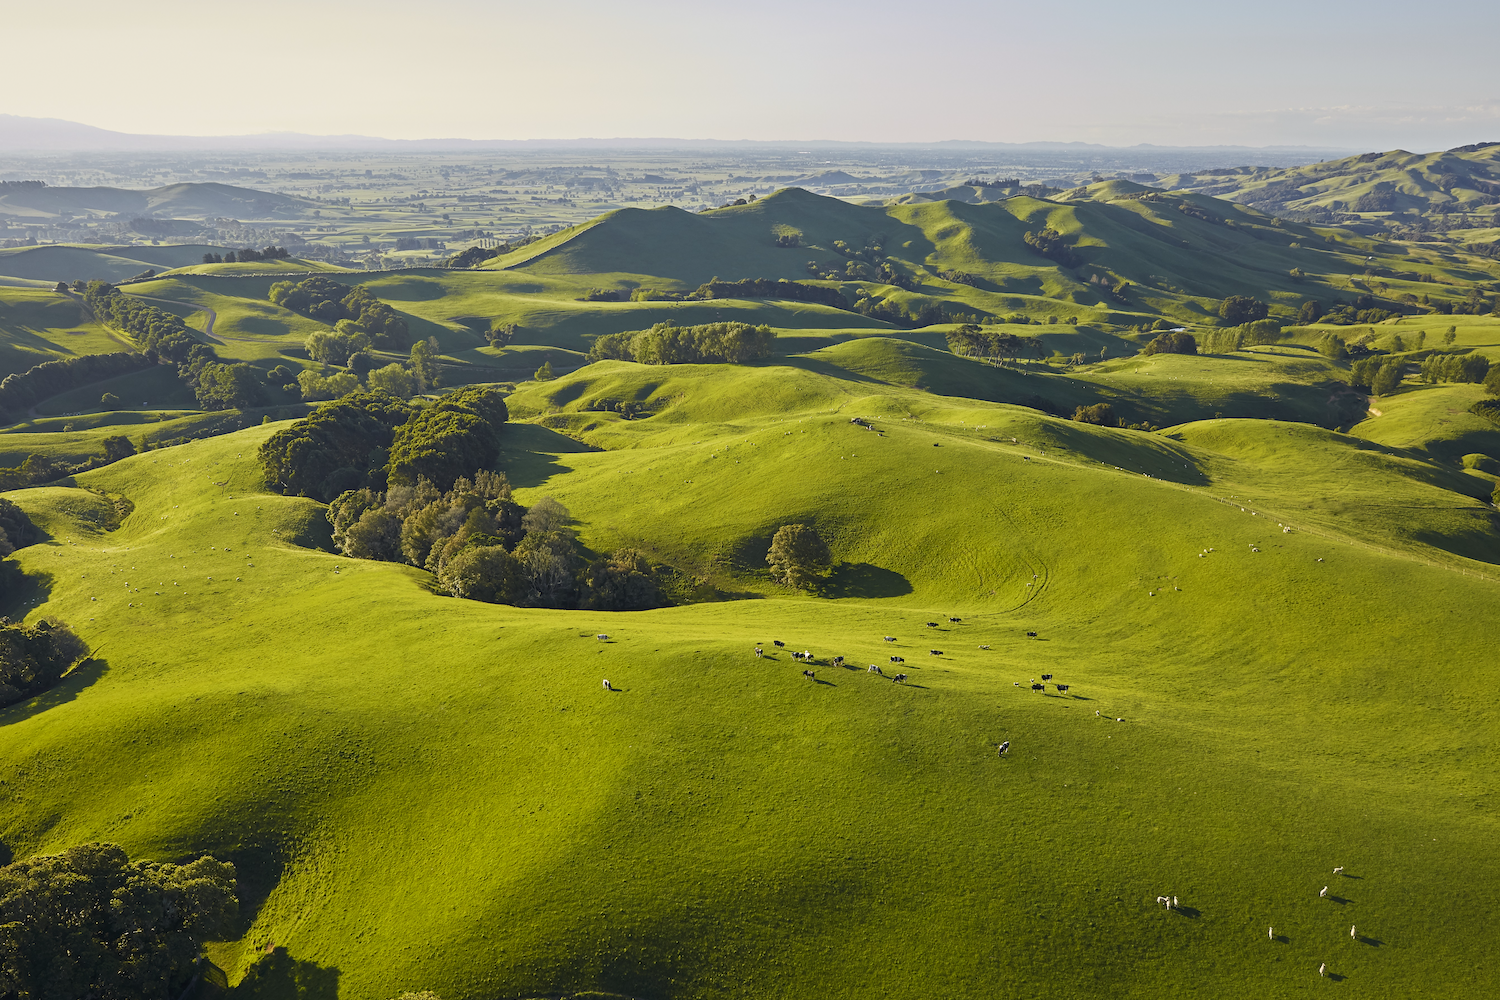 new zealand fields and farms with sheep grazing - grass-fed regenerative agriculture